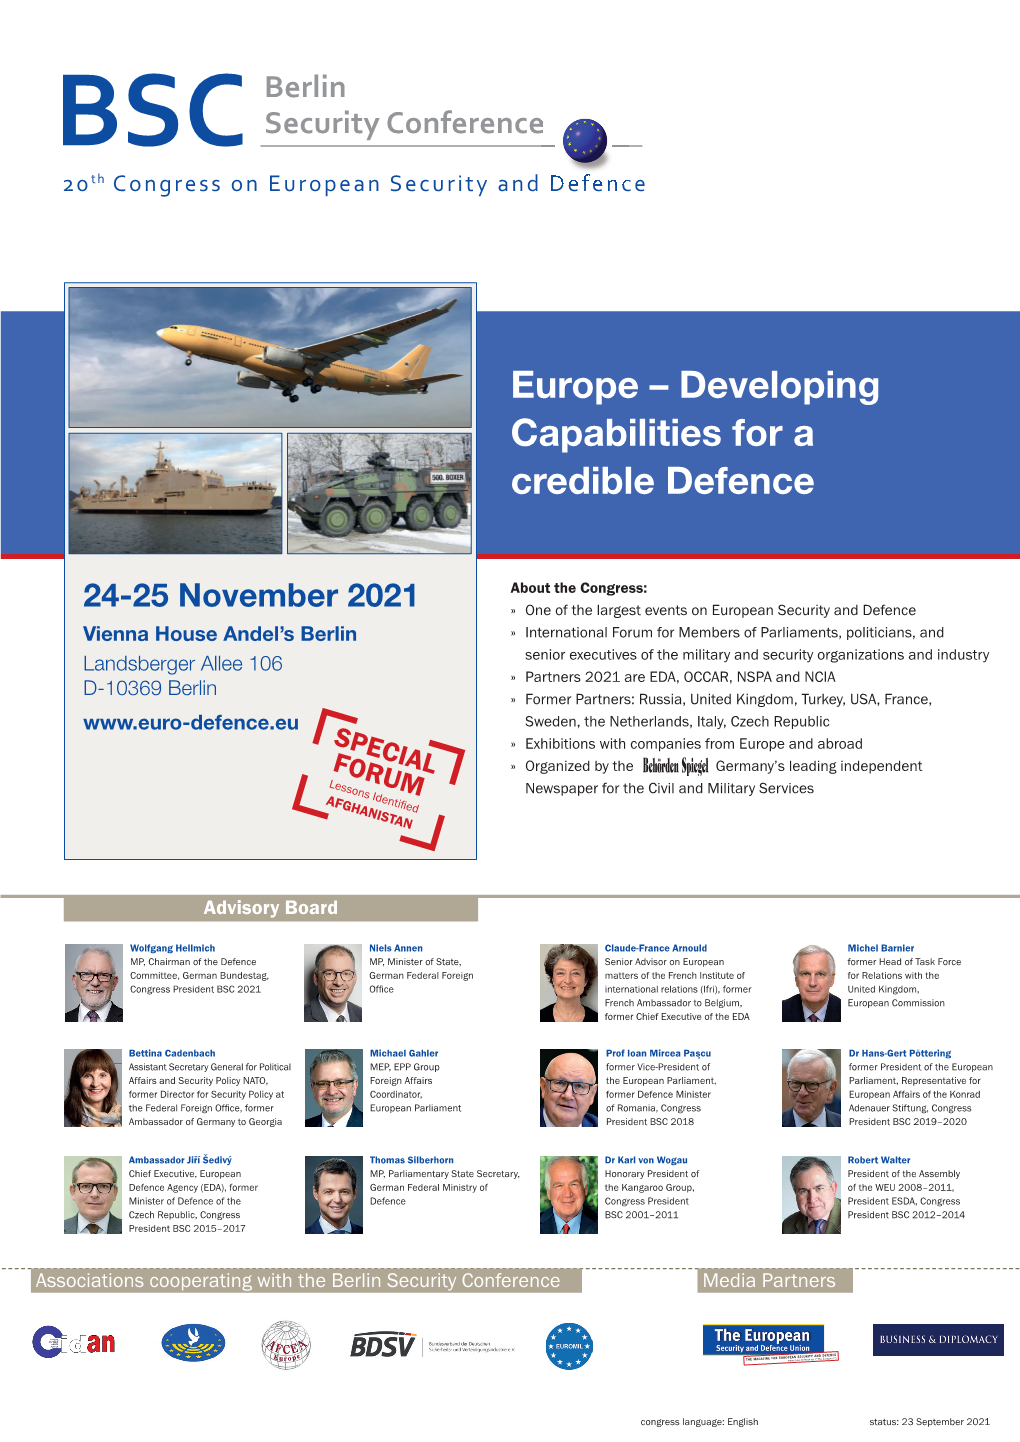 Europe – Developing Capabilities for a Credible Defence